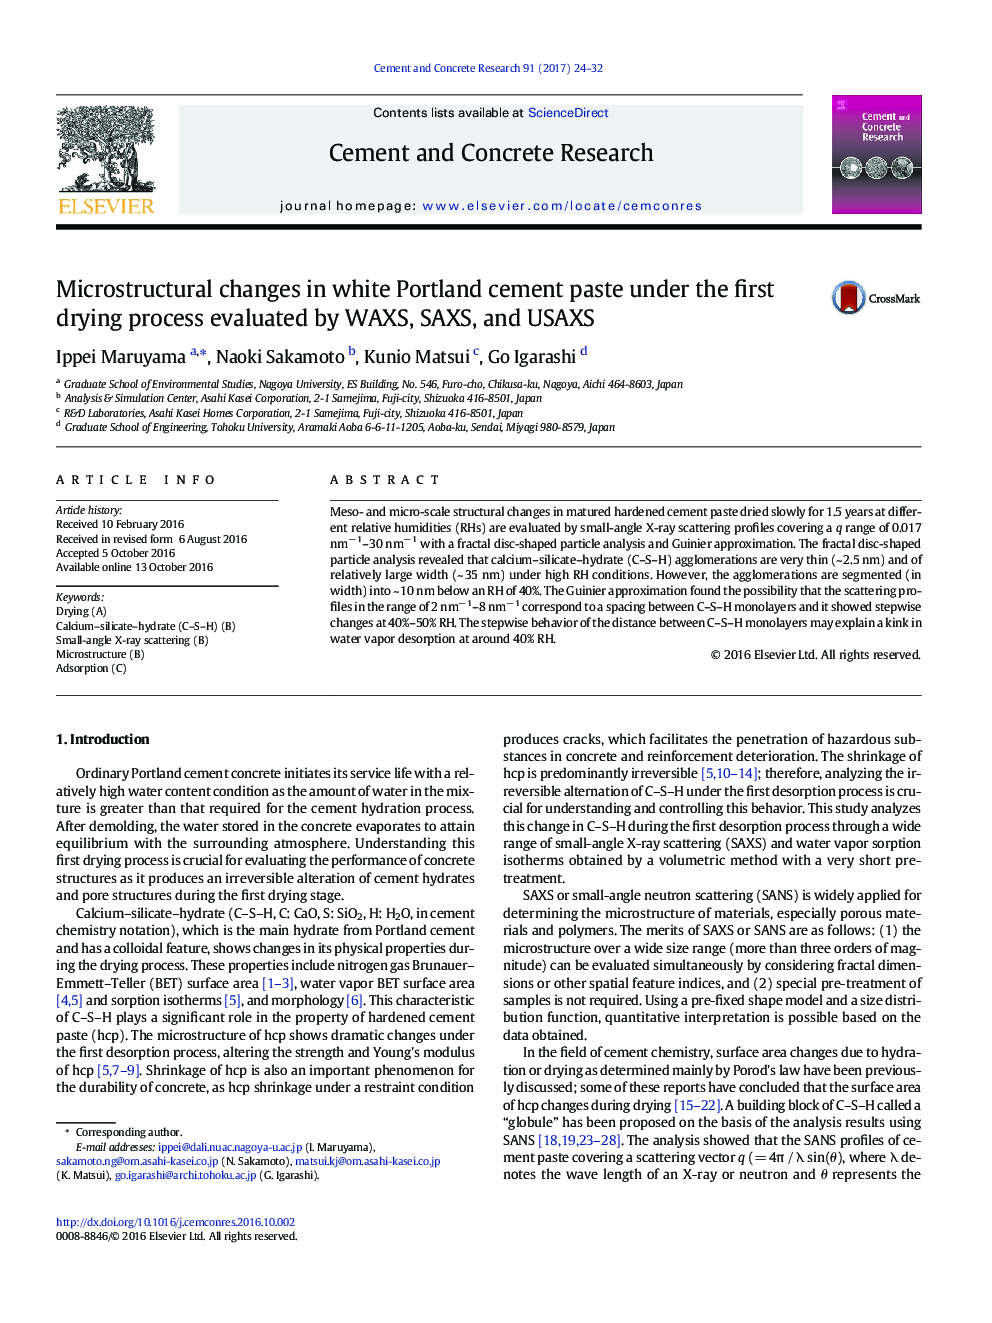 Microstructural changes in white Portland cement paste under the first drying process evaluated by WAXS, SAXS, and USAXS